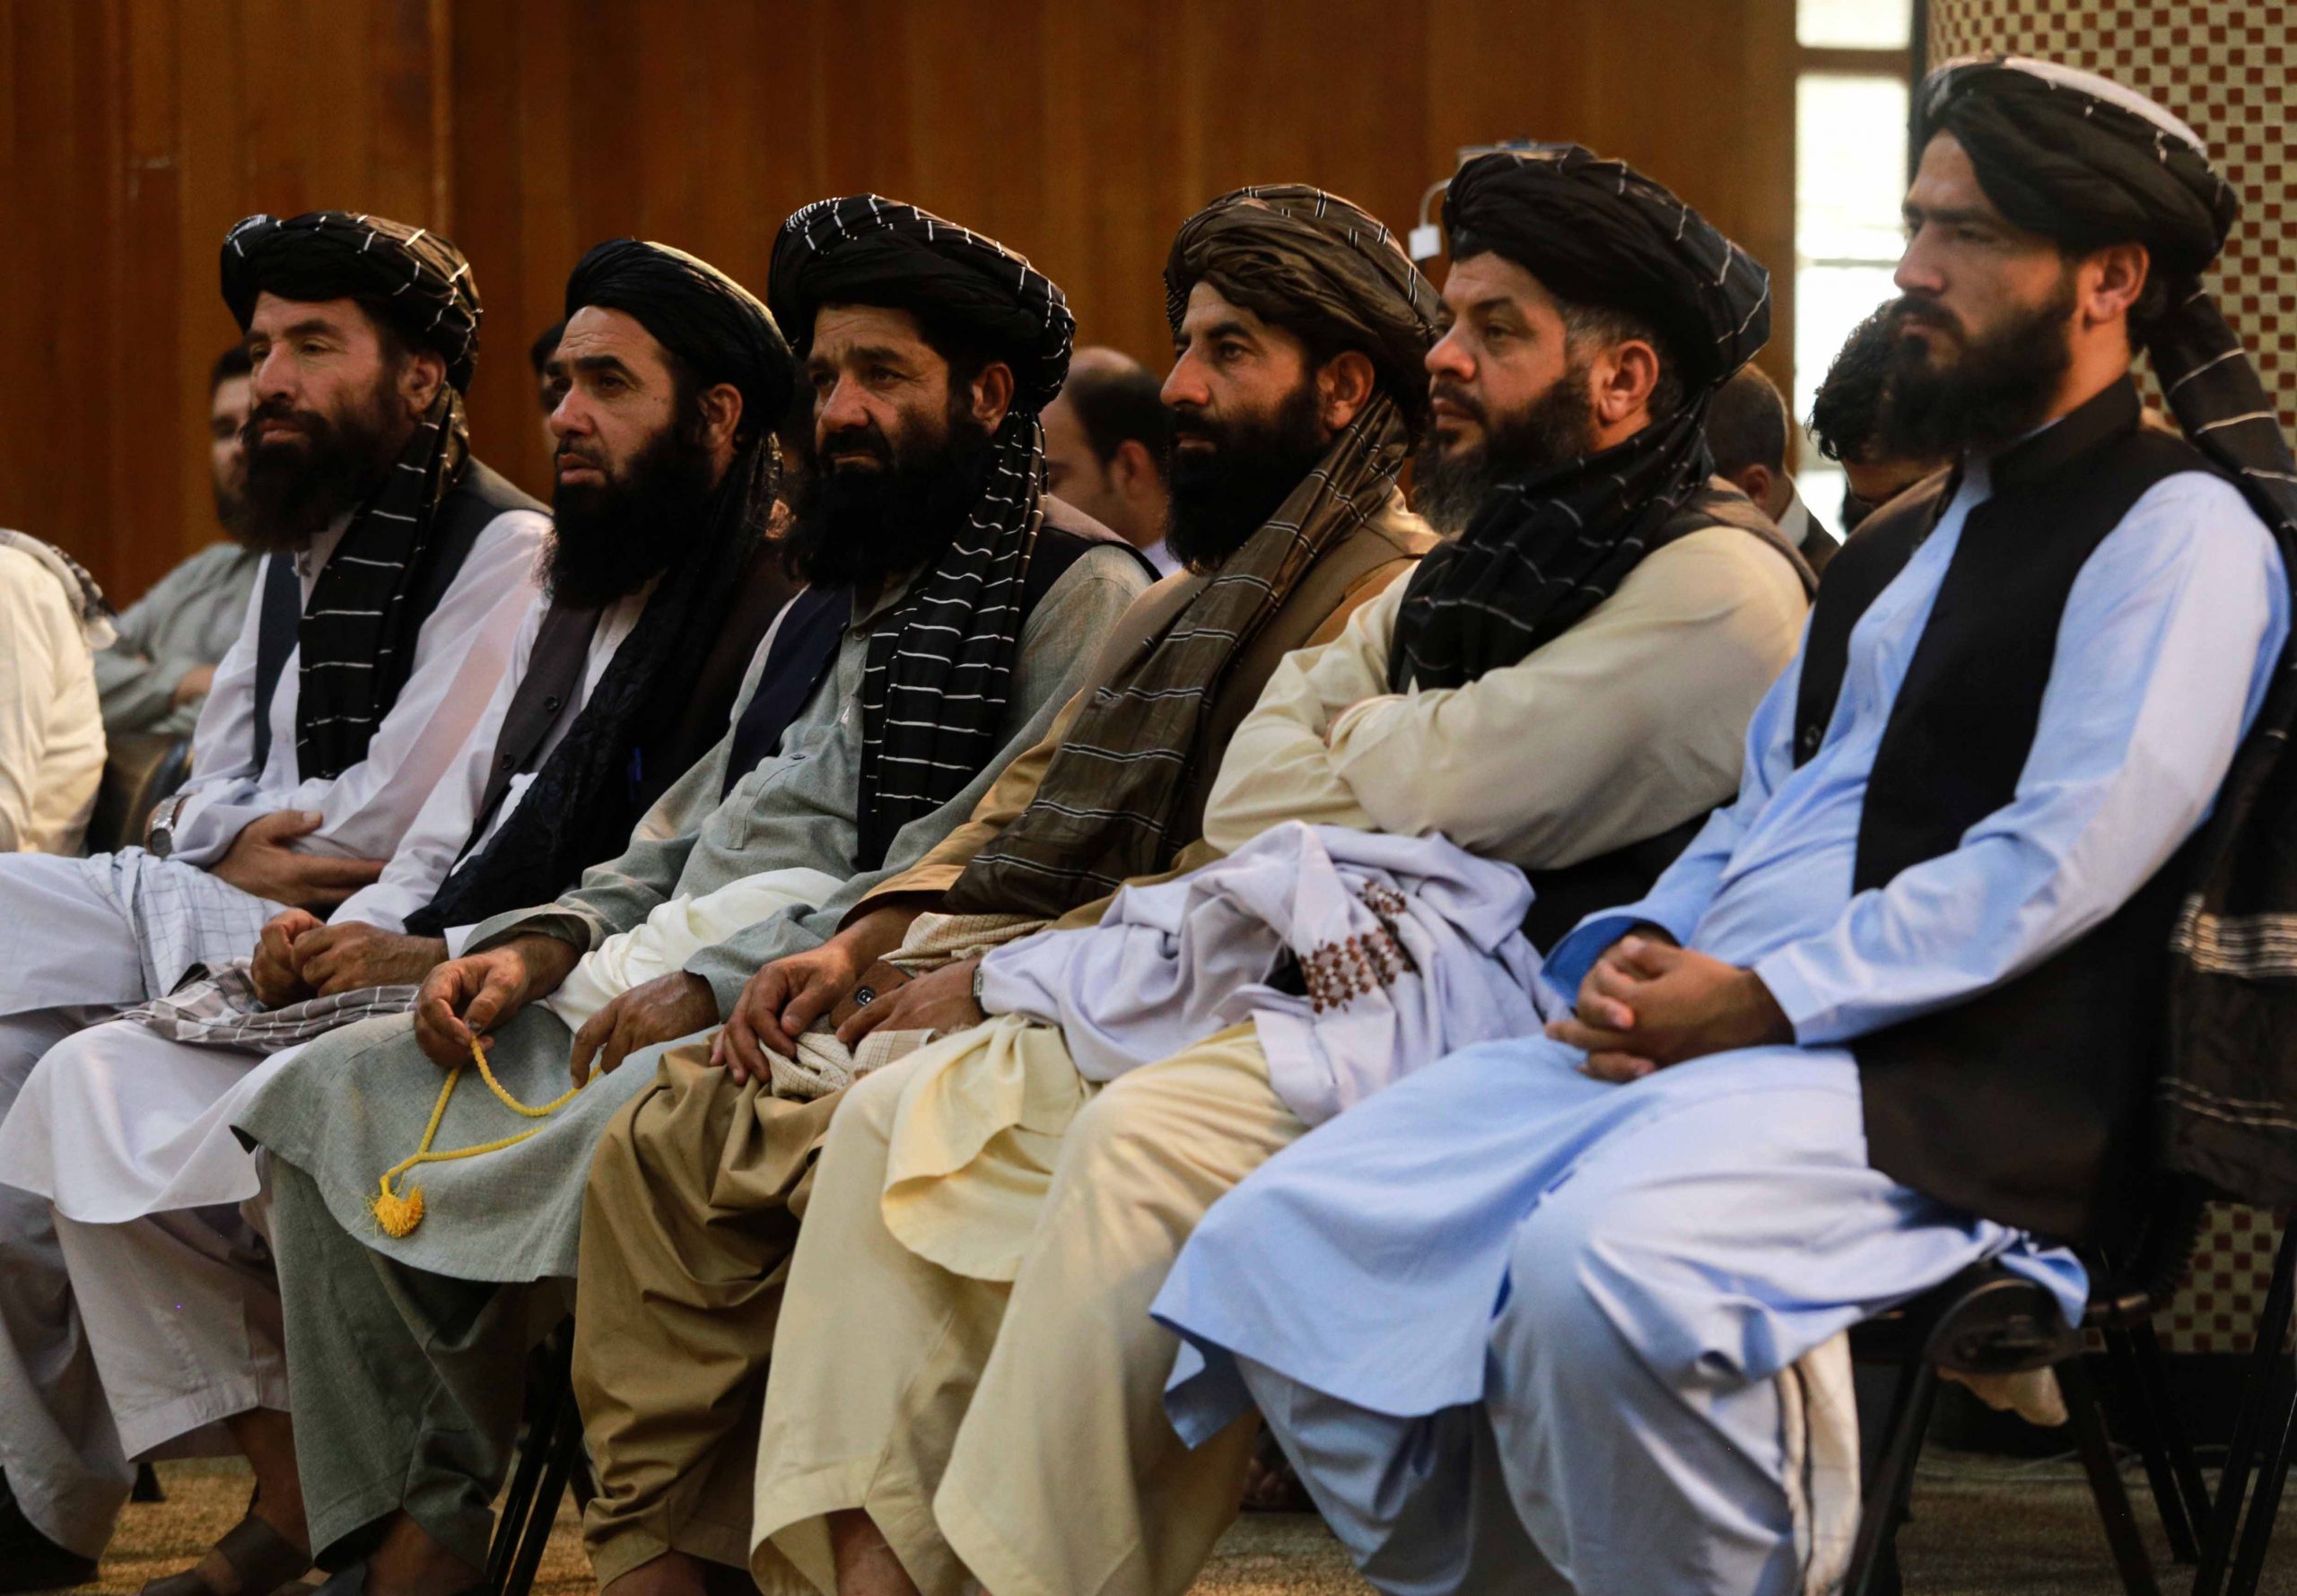 epa09463061 Taliban listen to Sheikh Abdul Baqi Haqqani, Taliban's Acting Minister of Higher Education, during a ceremony in Kabul, Afghanistan, 12 September 2021. Citing the threat of a humanitarian catastrophe, the  United Nations made an appeal to the international community to unblock aid to Afghanistan that was frozen when the Taliban returned to power nearly 20 years after being ousted by the United States. Afghans who plan to flee the country or are in need of cash to buy groceries and food resort to sell their household items as country's economy is in shambles due to uncertainty.  EPA/STRINGER